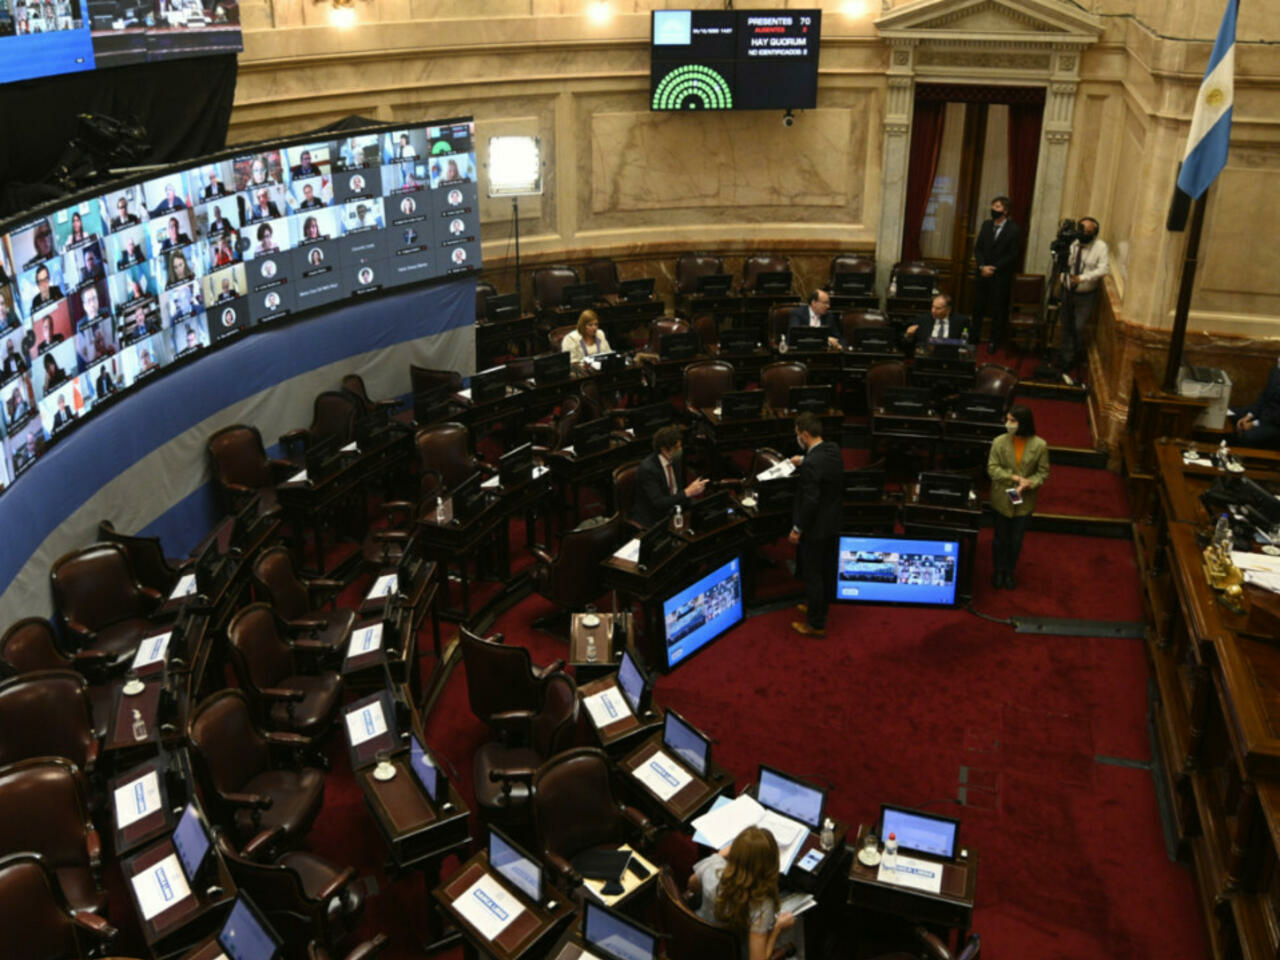 Remote sessions in the Argentinian parliament using live communications over the internet. Zoom (45%), a private proprietary and closed source software is the most used communication tool in parliaments